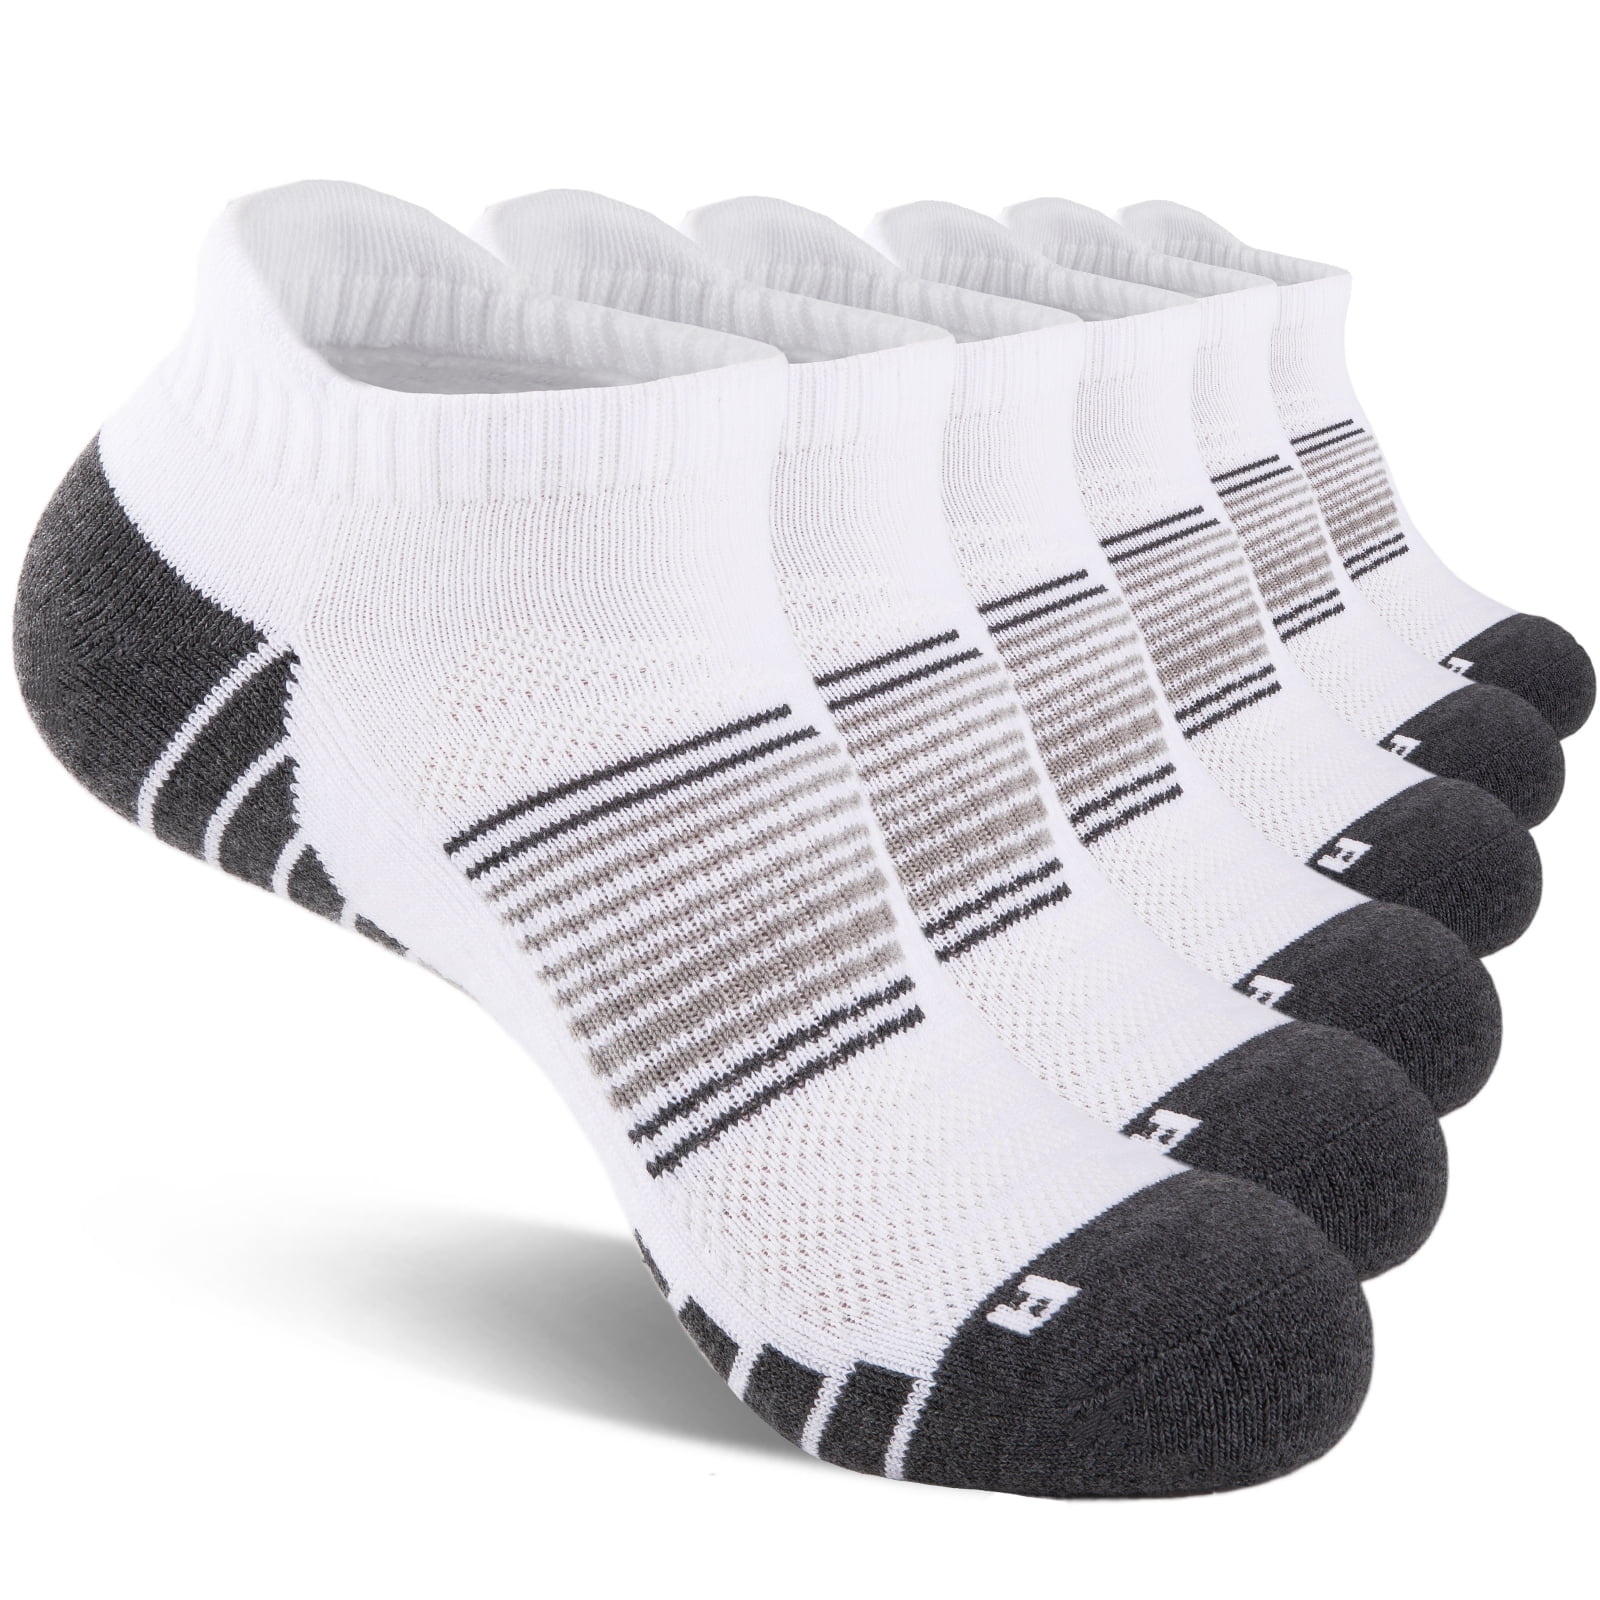 COOPLUS Mens Ankle Socks Cushioned Low Cut Socks for Men Athletic ...